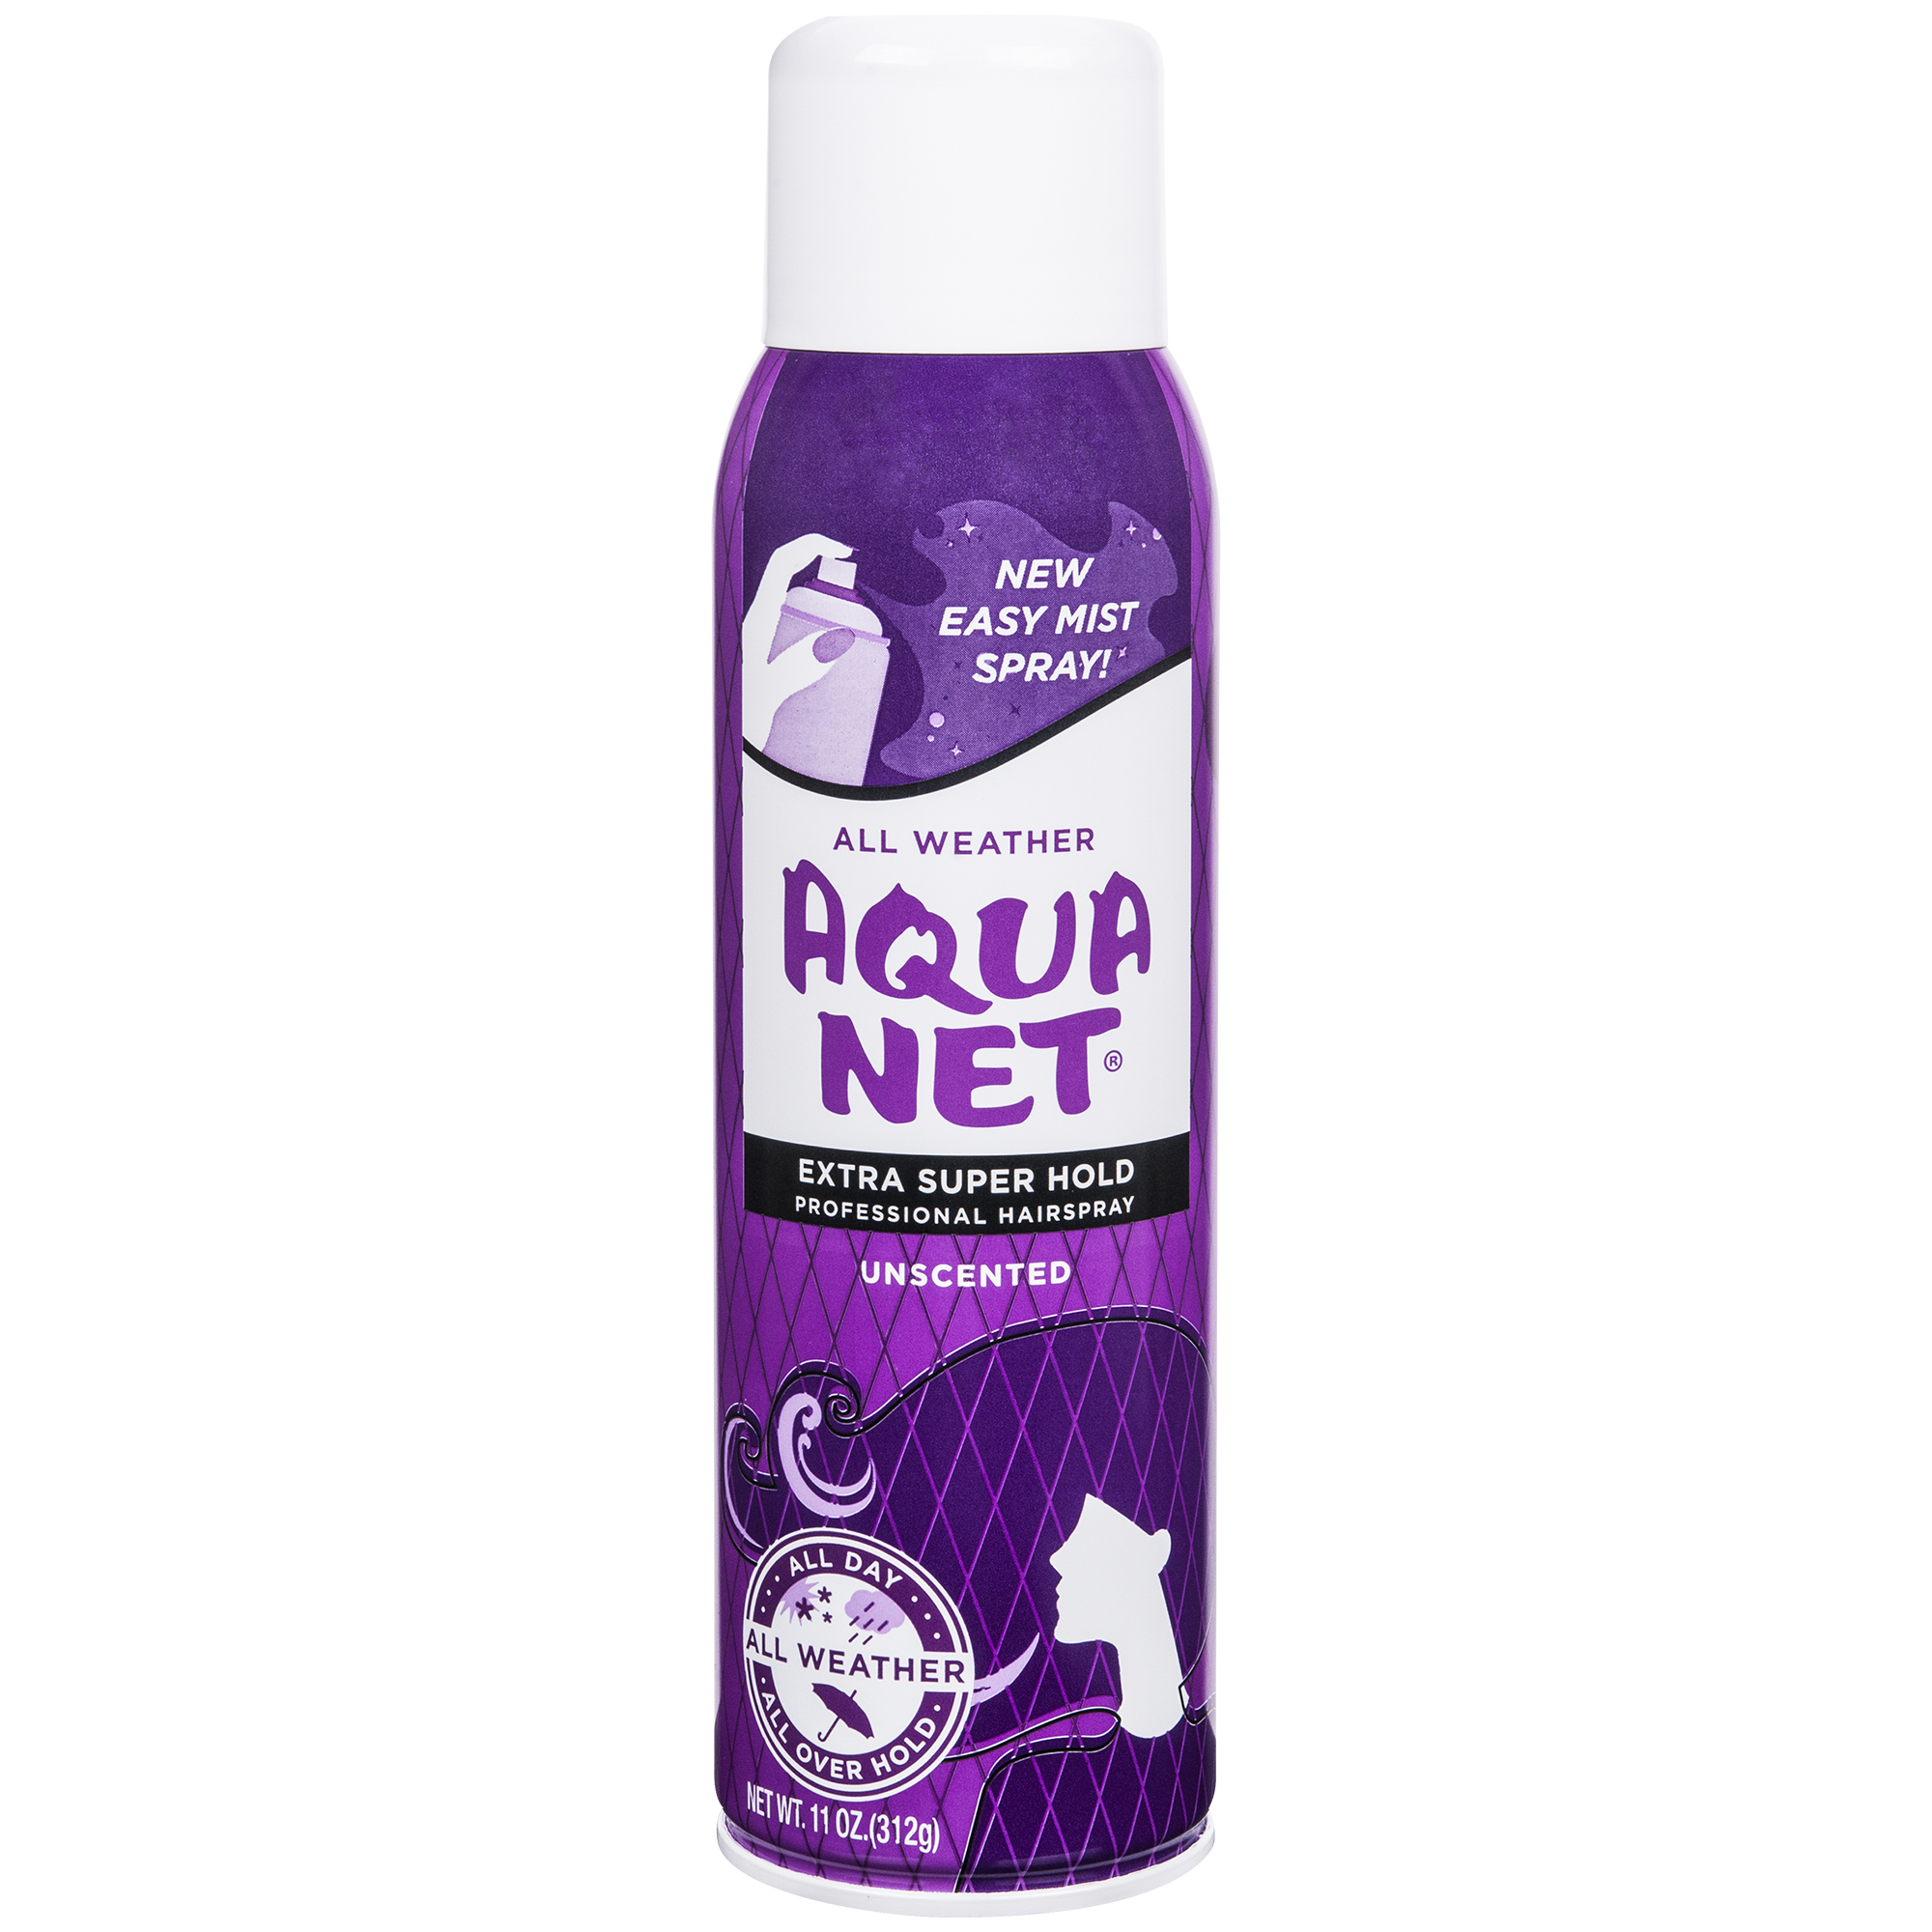 Aqua Net Hairspray, Extra Super Hold, Unscented, 11 oz Aerosol Can - image 1 of 8